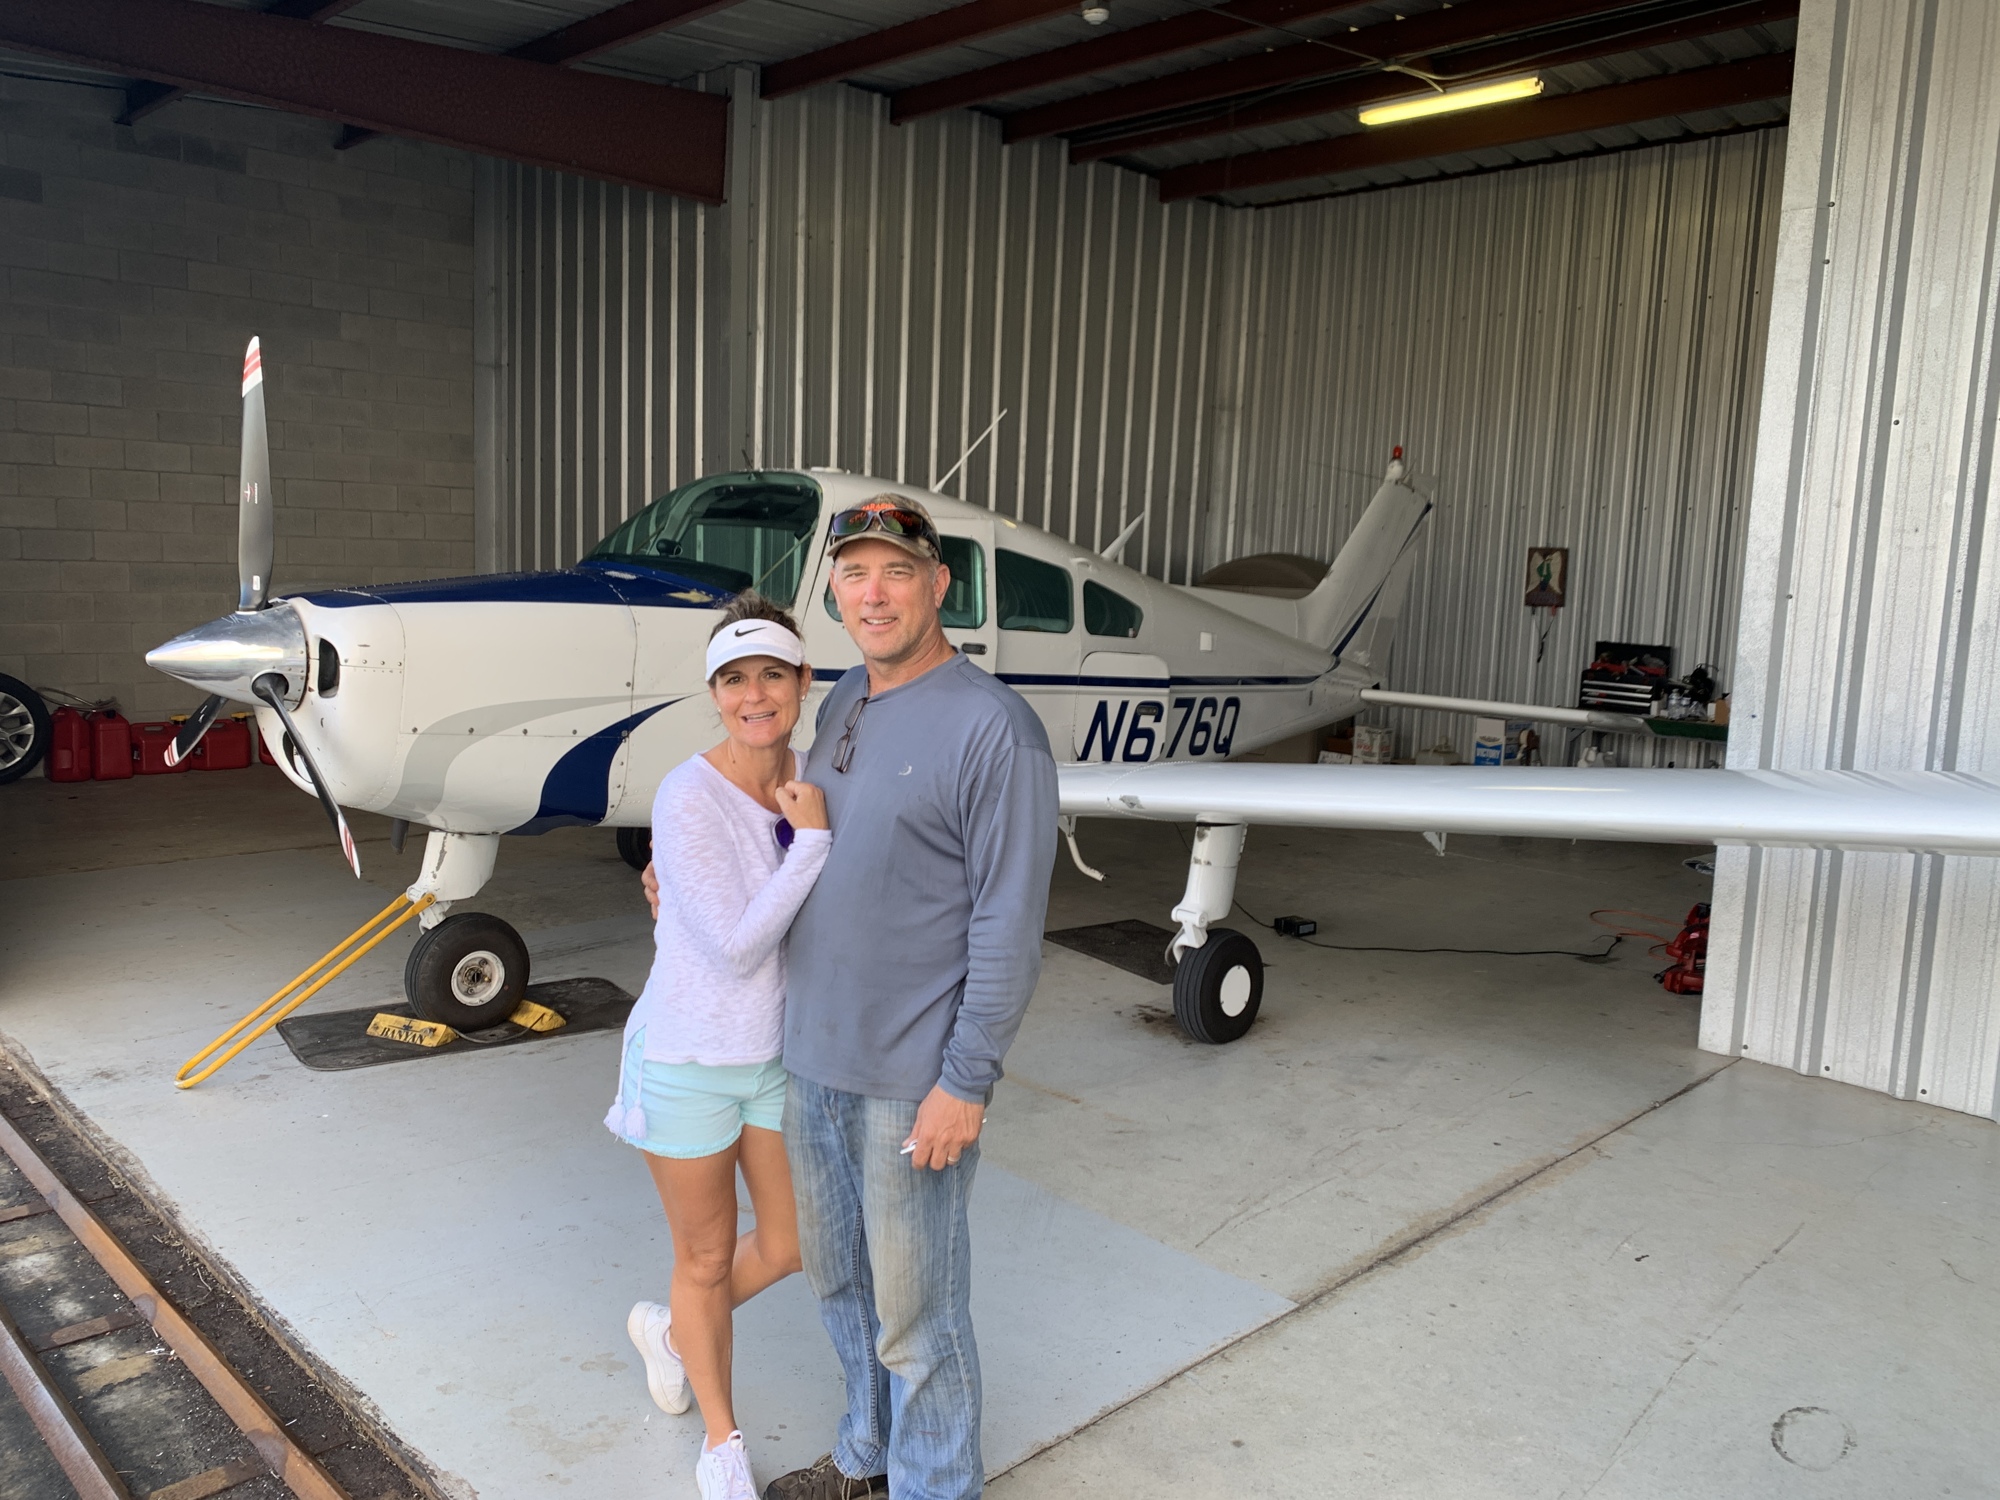 Kelly Caldwell received his pilot's license over a year ago. His wife, Melissa, may not be far behind. (Courtesy photo)